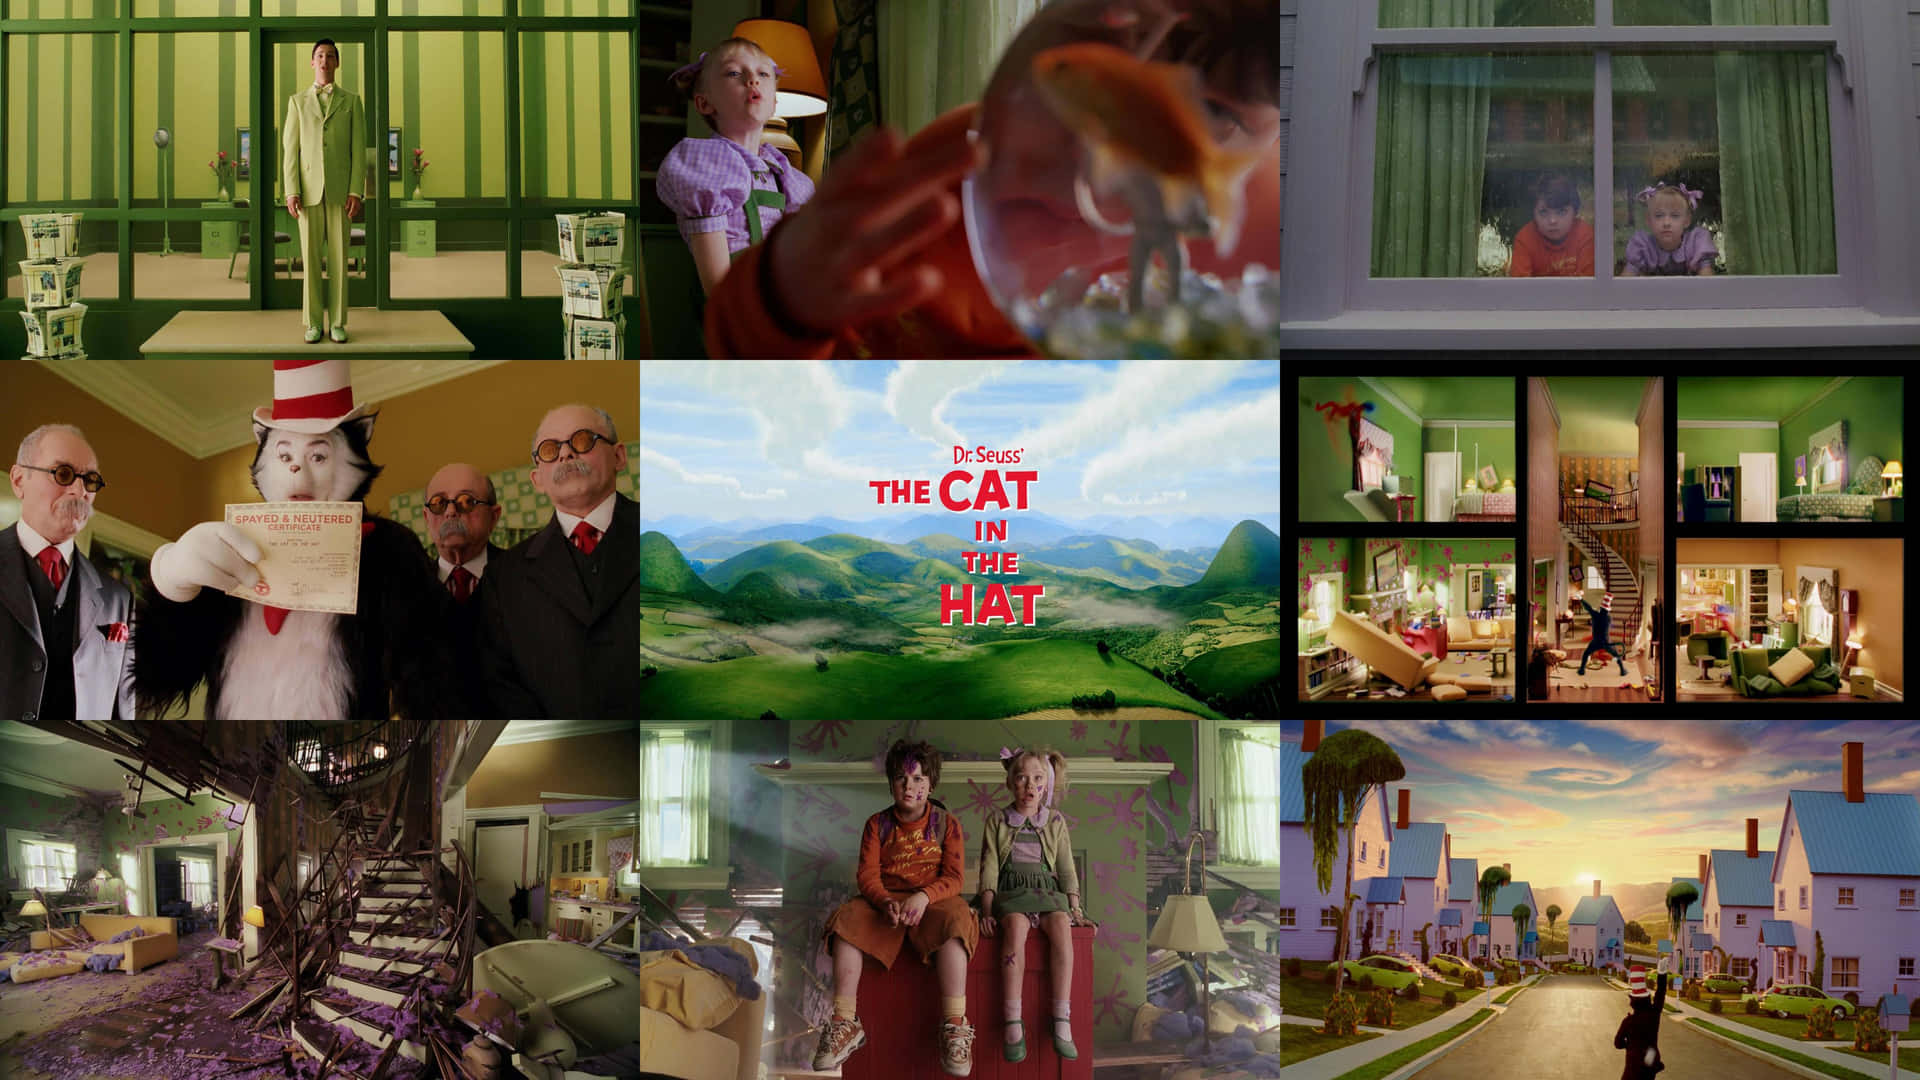 A Collage Of Images Of Dr Seuss's Cat In The Hat